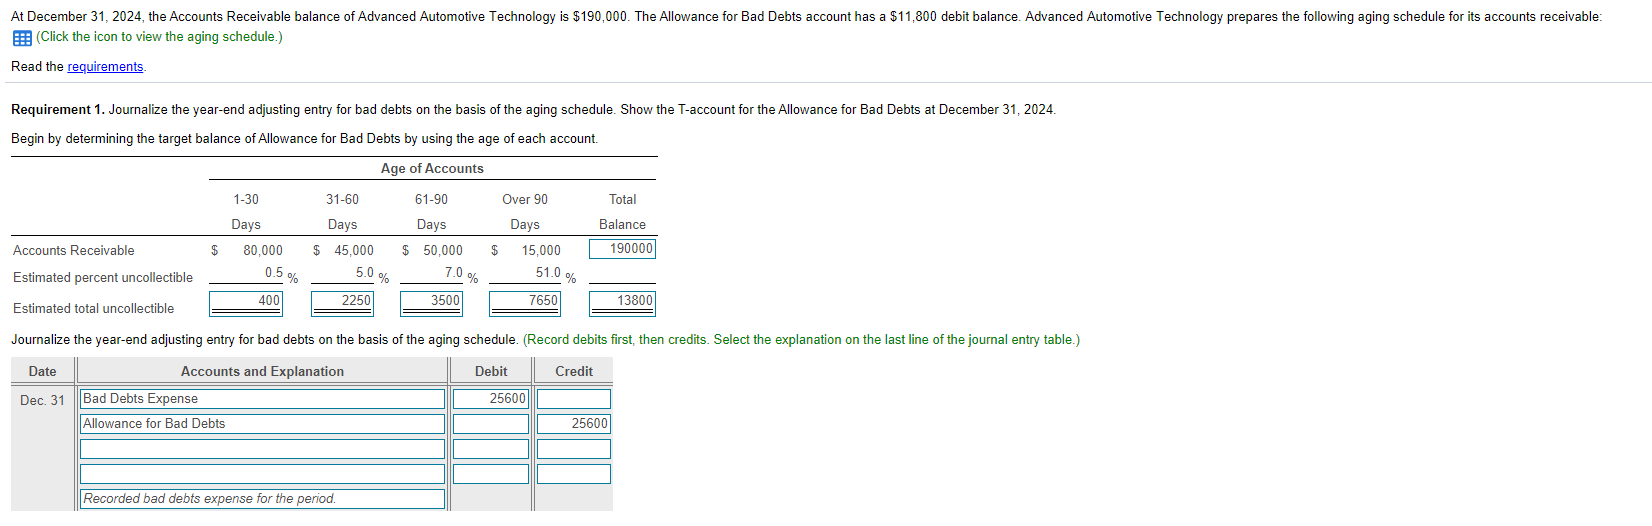 Solved At December 31, 2024, the Accounts Receivable balance